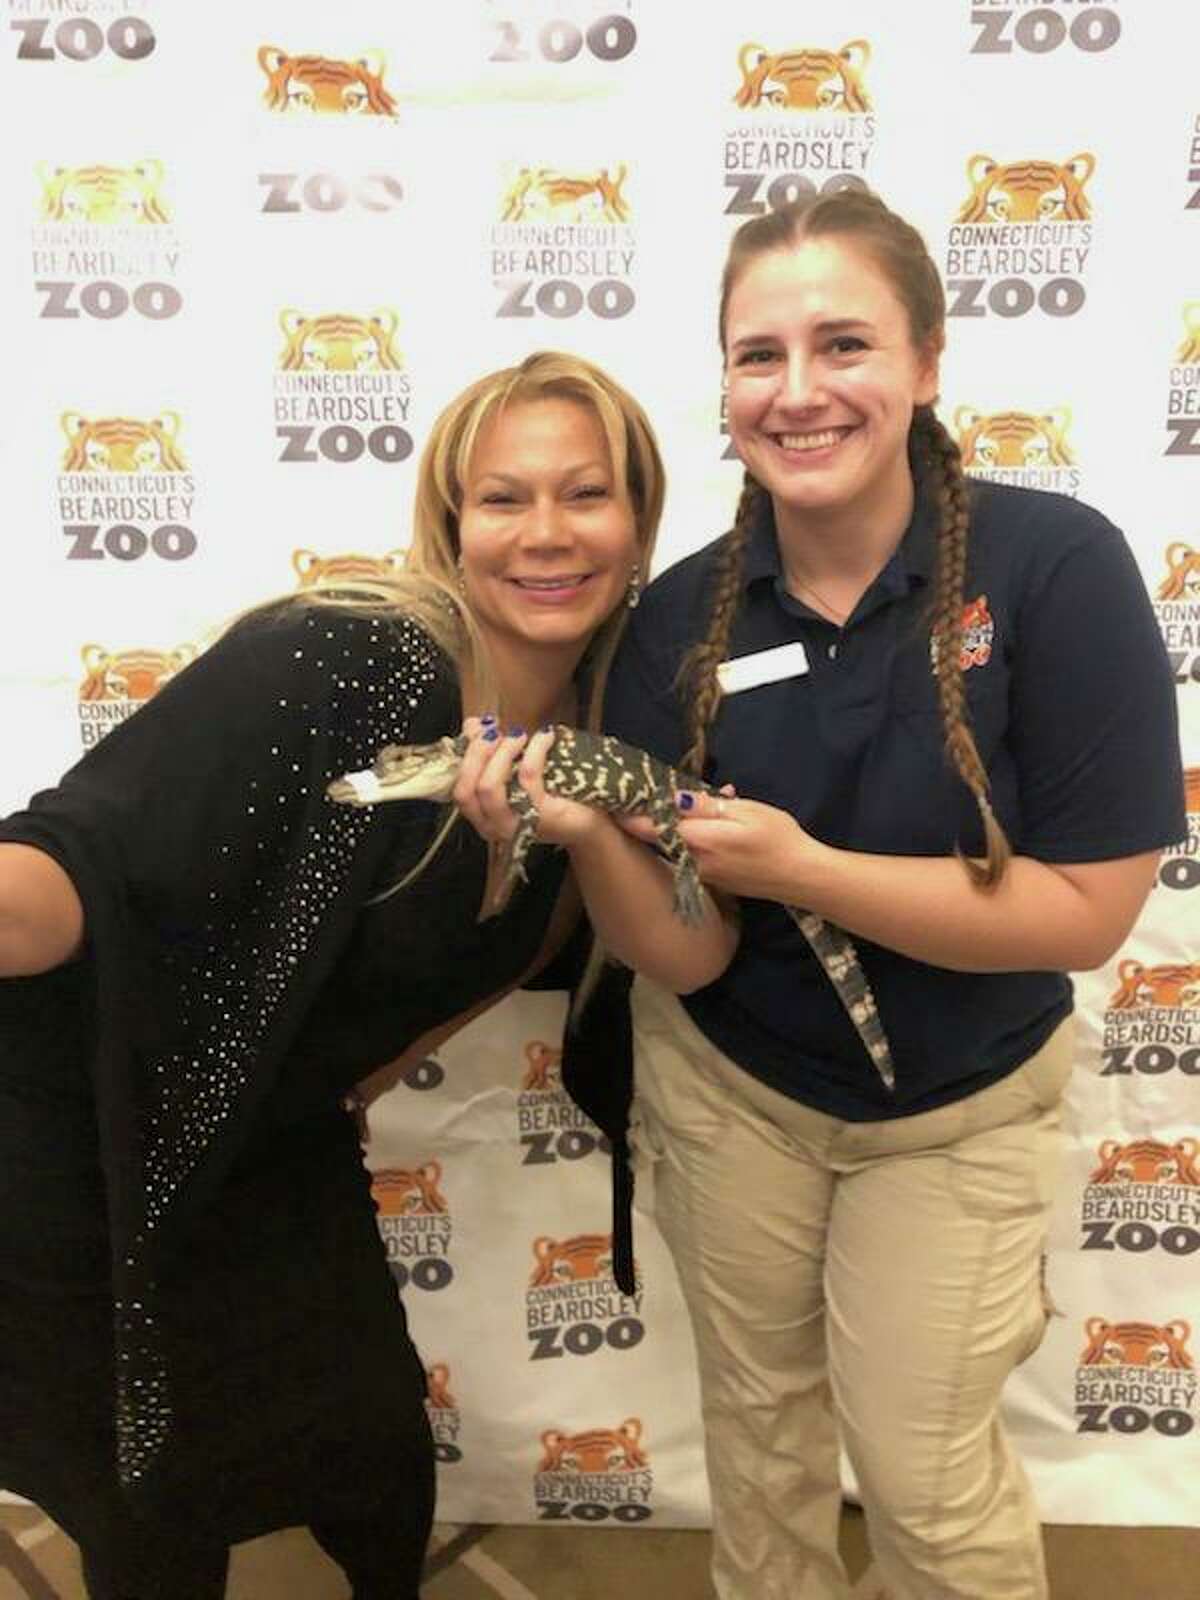 Connecticut’s Beardsley Zoo was selected to receive 15% of proceeds from wine sales from Fairfield-based Ardaso Wine. The company’s CEO, Sonja Narcisse, left, named the zoo as a recipient of the company’s corporate giving program beginning in January 2020, according to a news release.